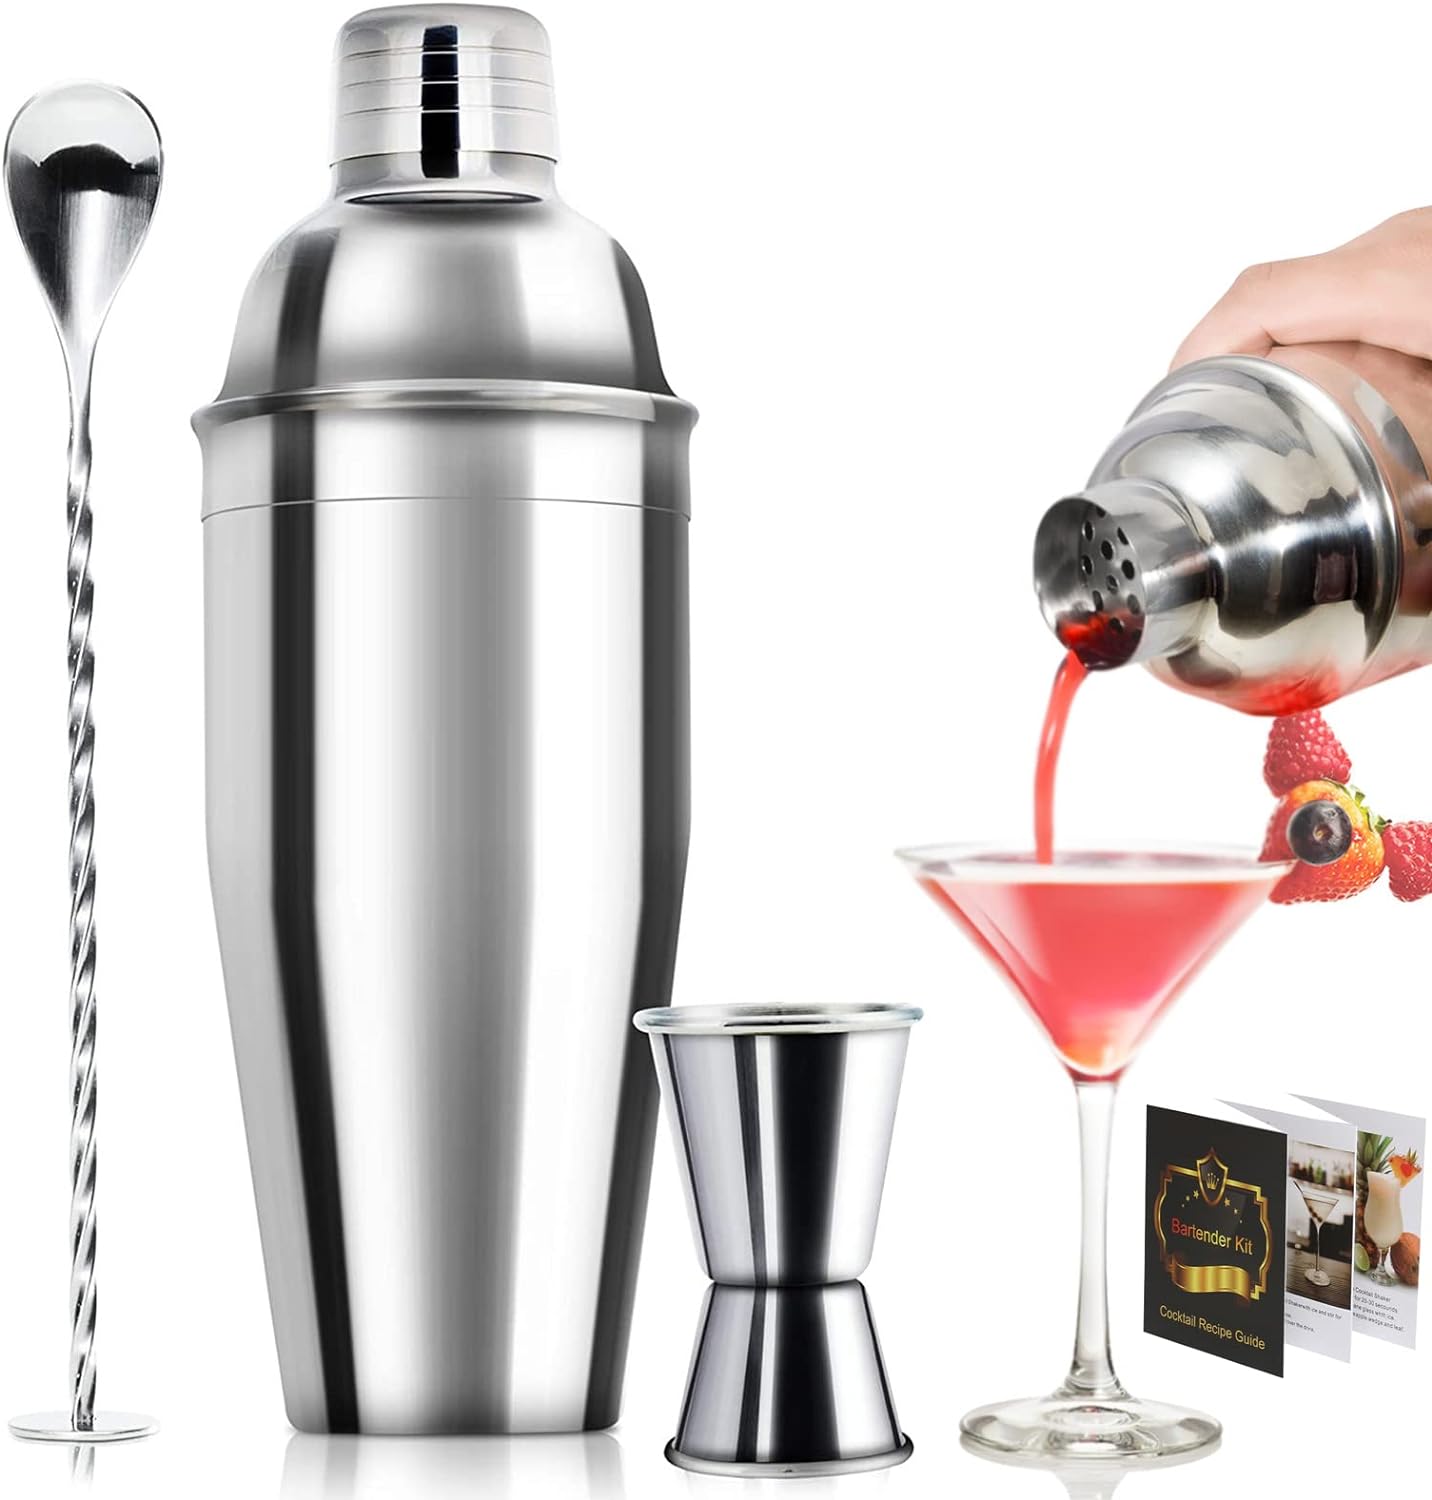 Professional 24oz Cocktail Shaker Set with Measuring Jigger, Mixing Spoon, and Built-in Strainer – Stainless Steel Bar Tools for Perfect Margaritas and Martinis